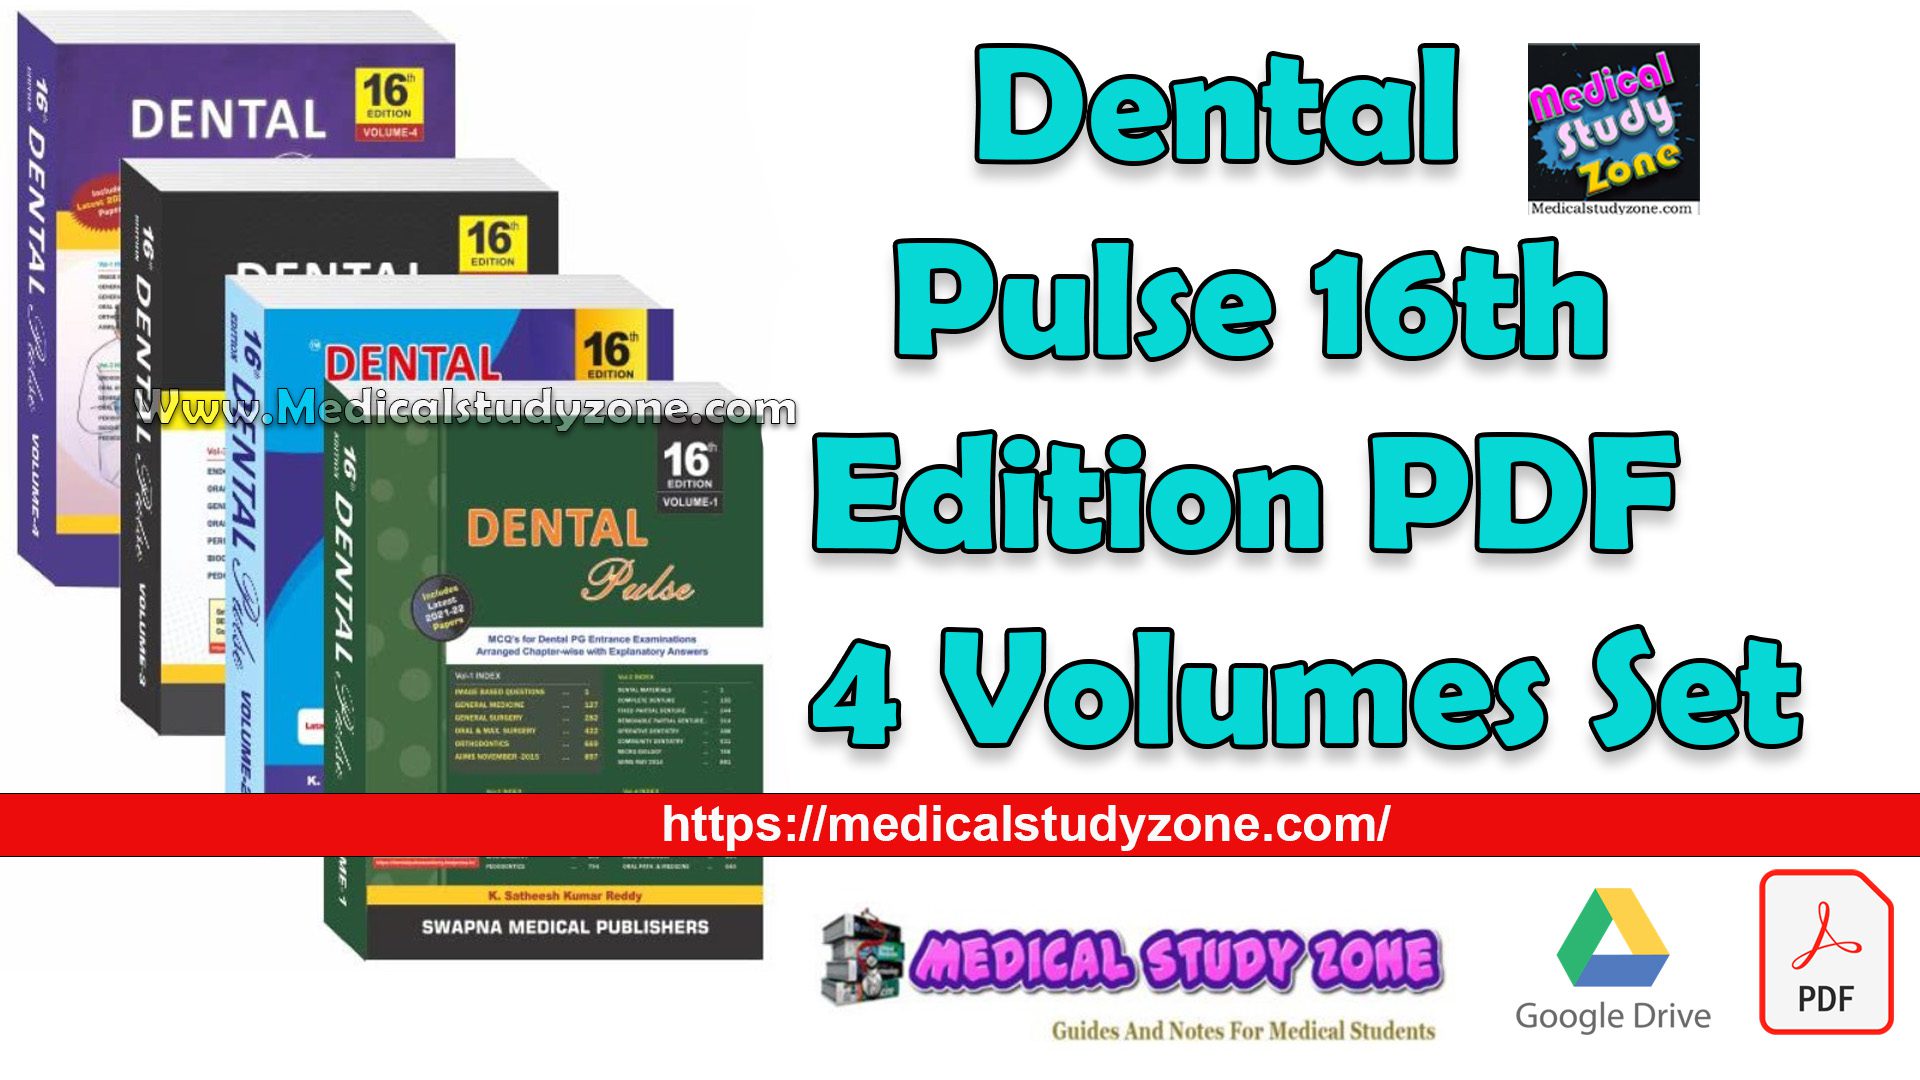 Dental Pulse 16th Edition PDF Free Download [All Set of 4 Volumes]